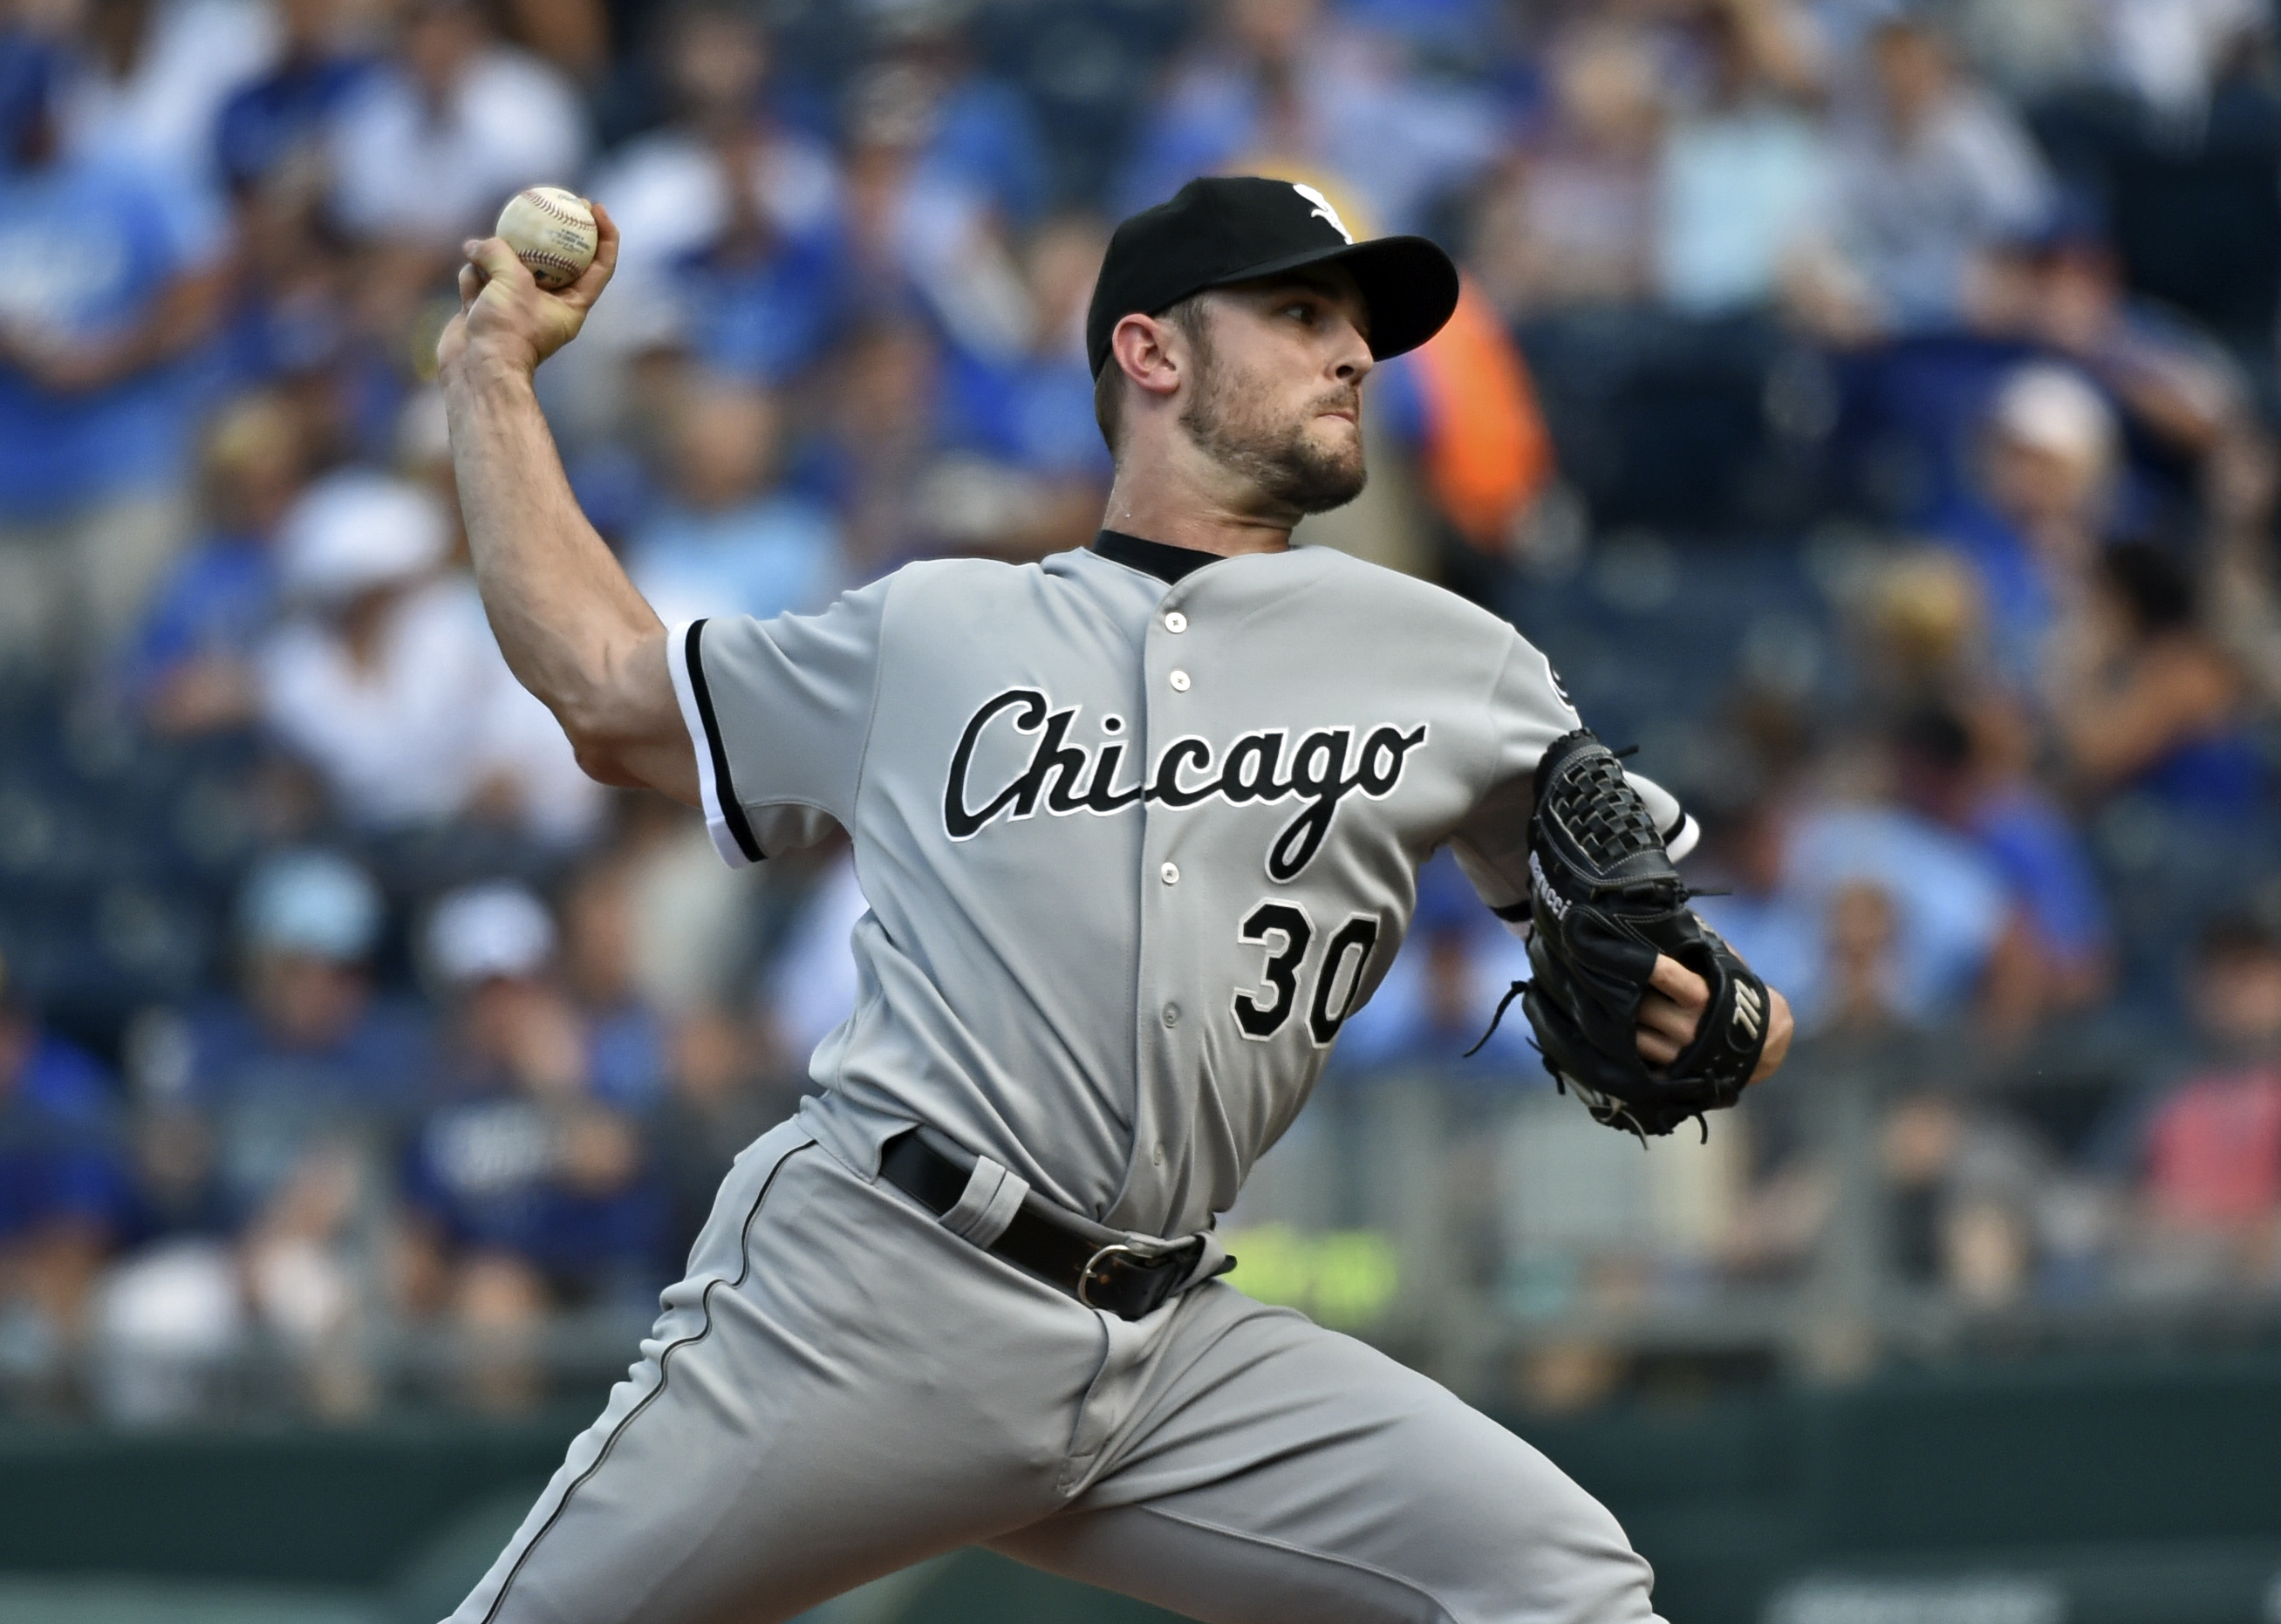 Sep 6, 2015; Kansas City, MO, USA; Chicago White Sox pitcher David Robertson (30) delivers a pitch against the Kansas City Royals during the ninth inning at Kauffman Stadium. Mandatory Credit: Peter G. Aiken-USA TODAY Sports